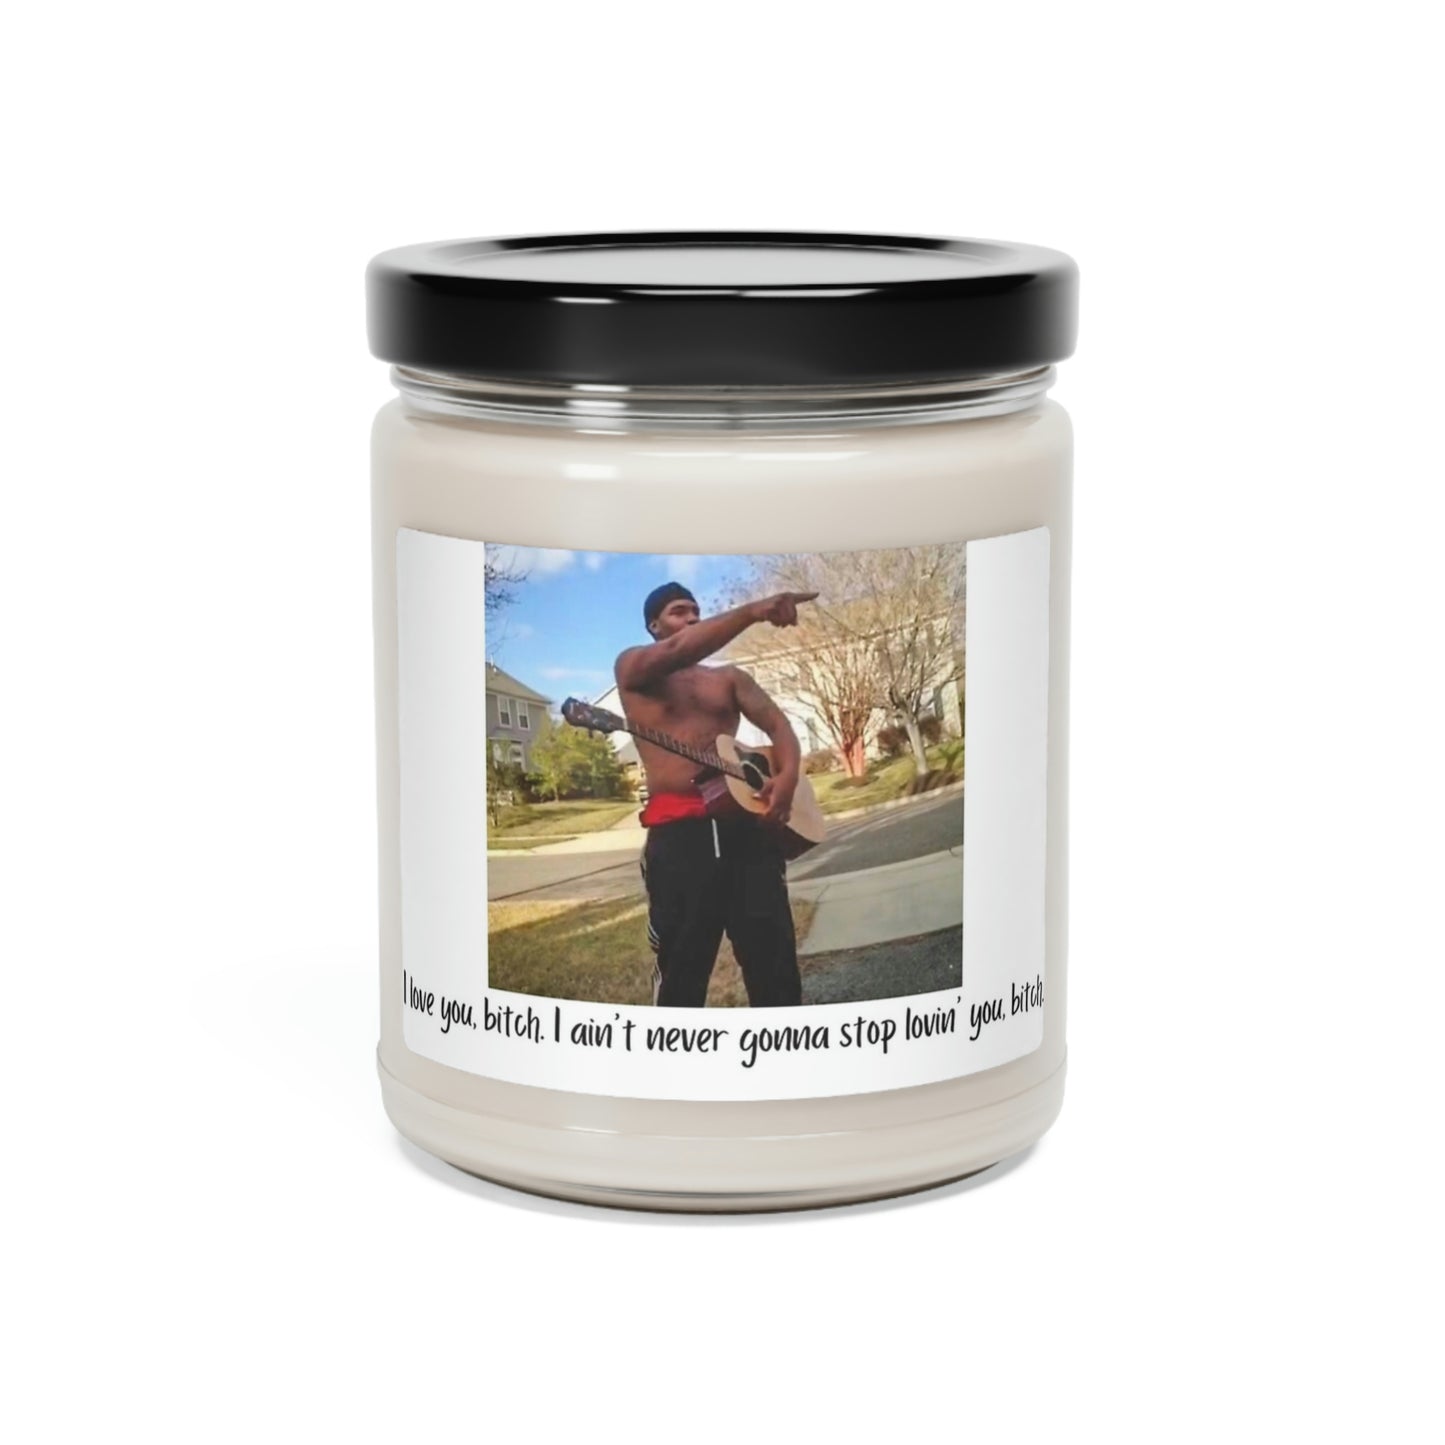 I Love You Bitch Scented Soy Candle